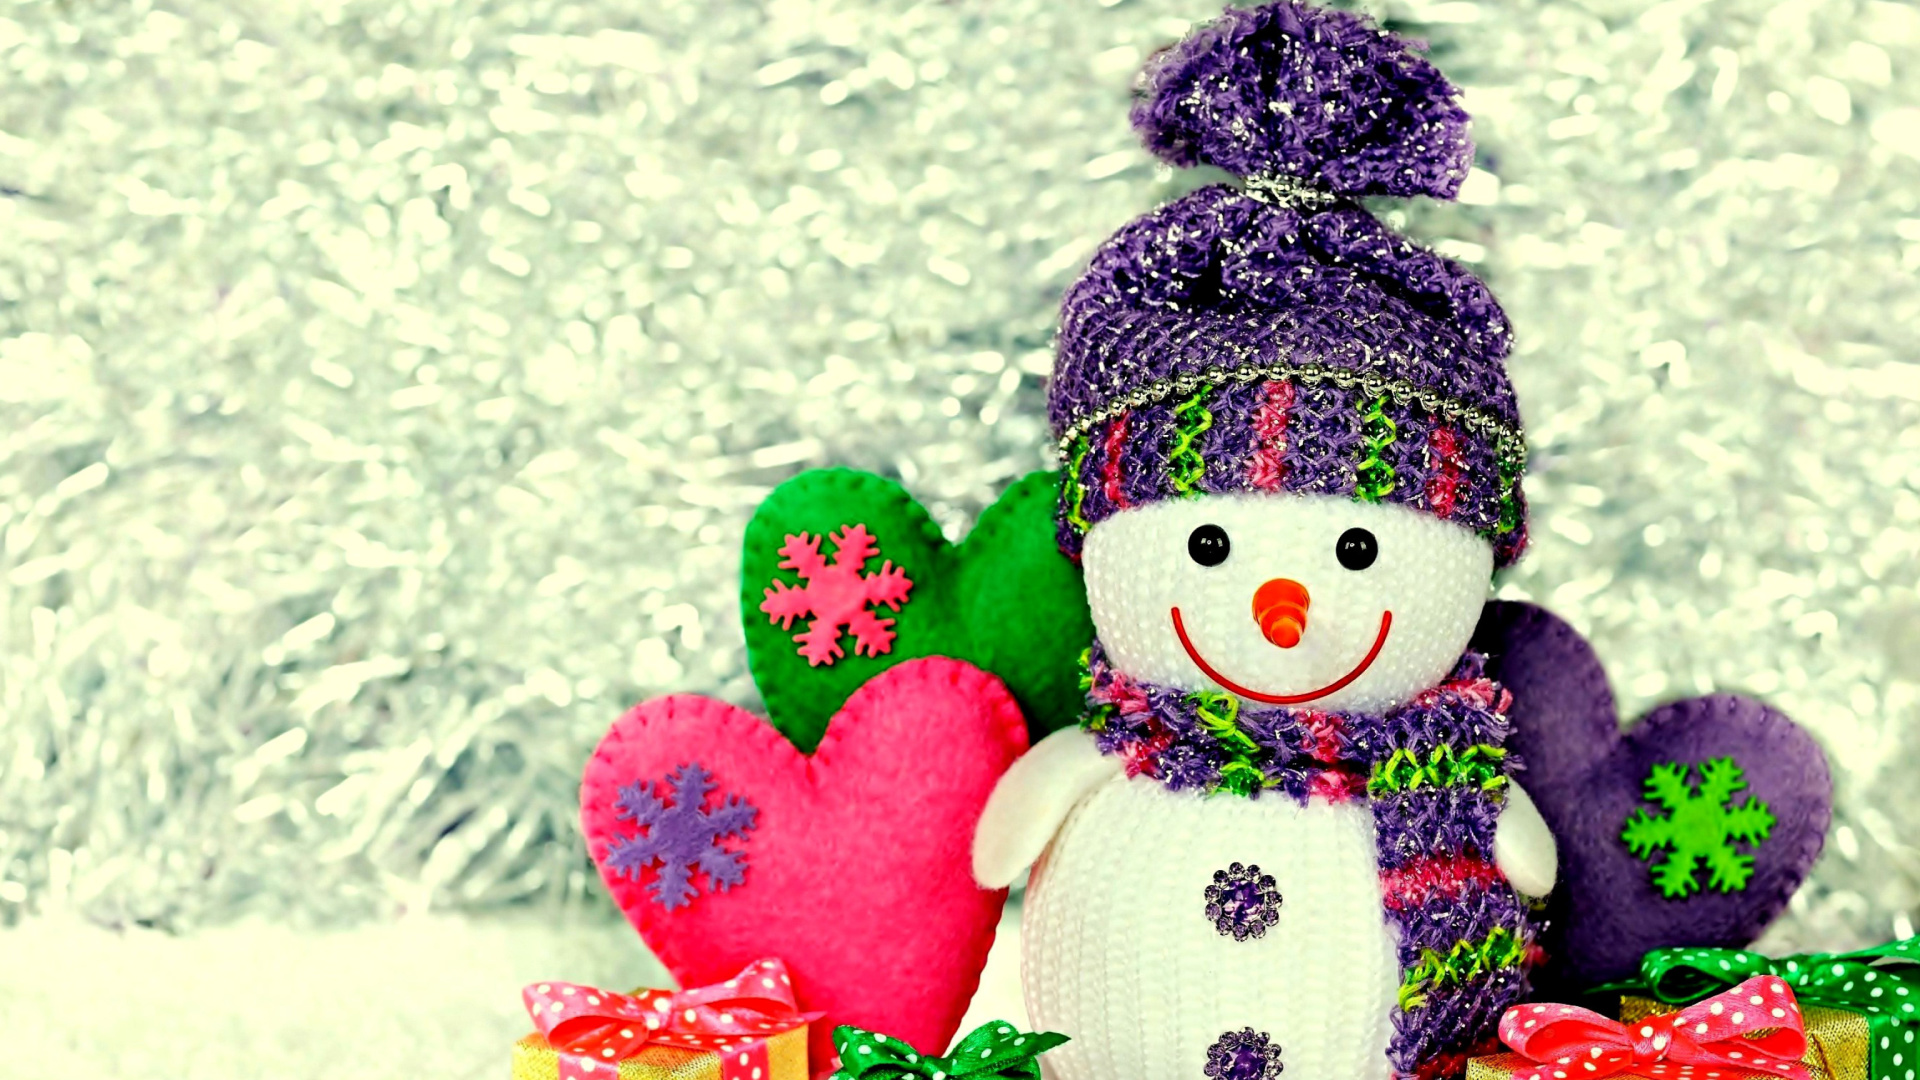 Homemade Snowman with Gifts wallpaper 1920x1080